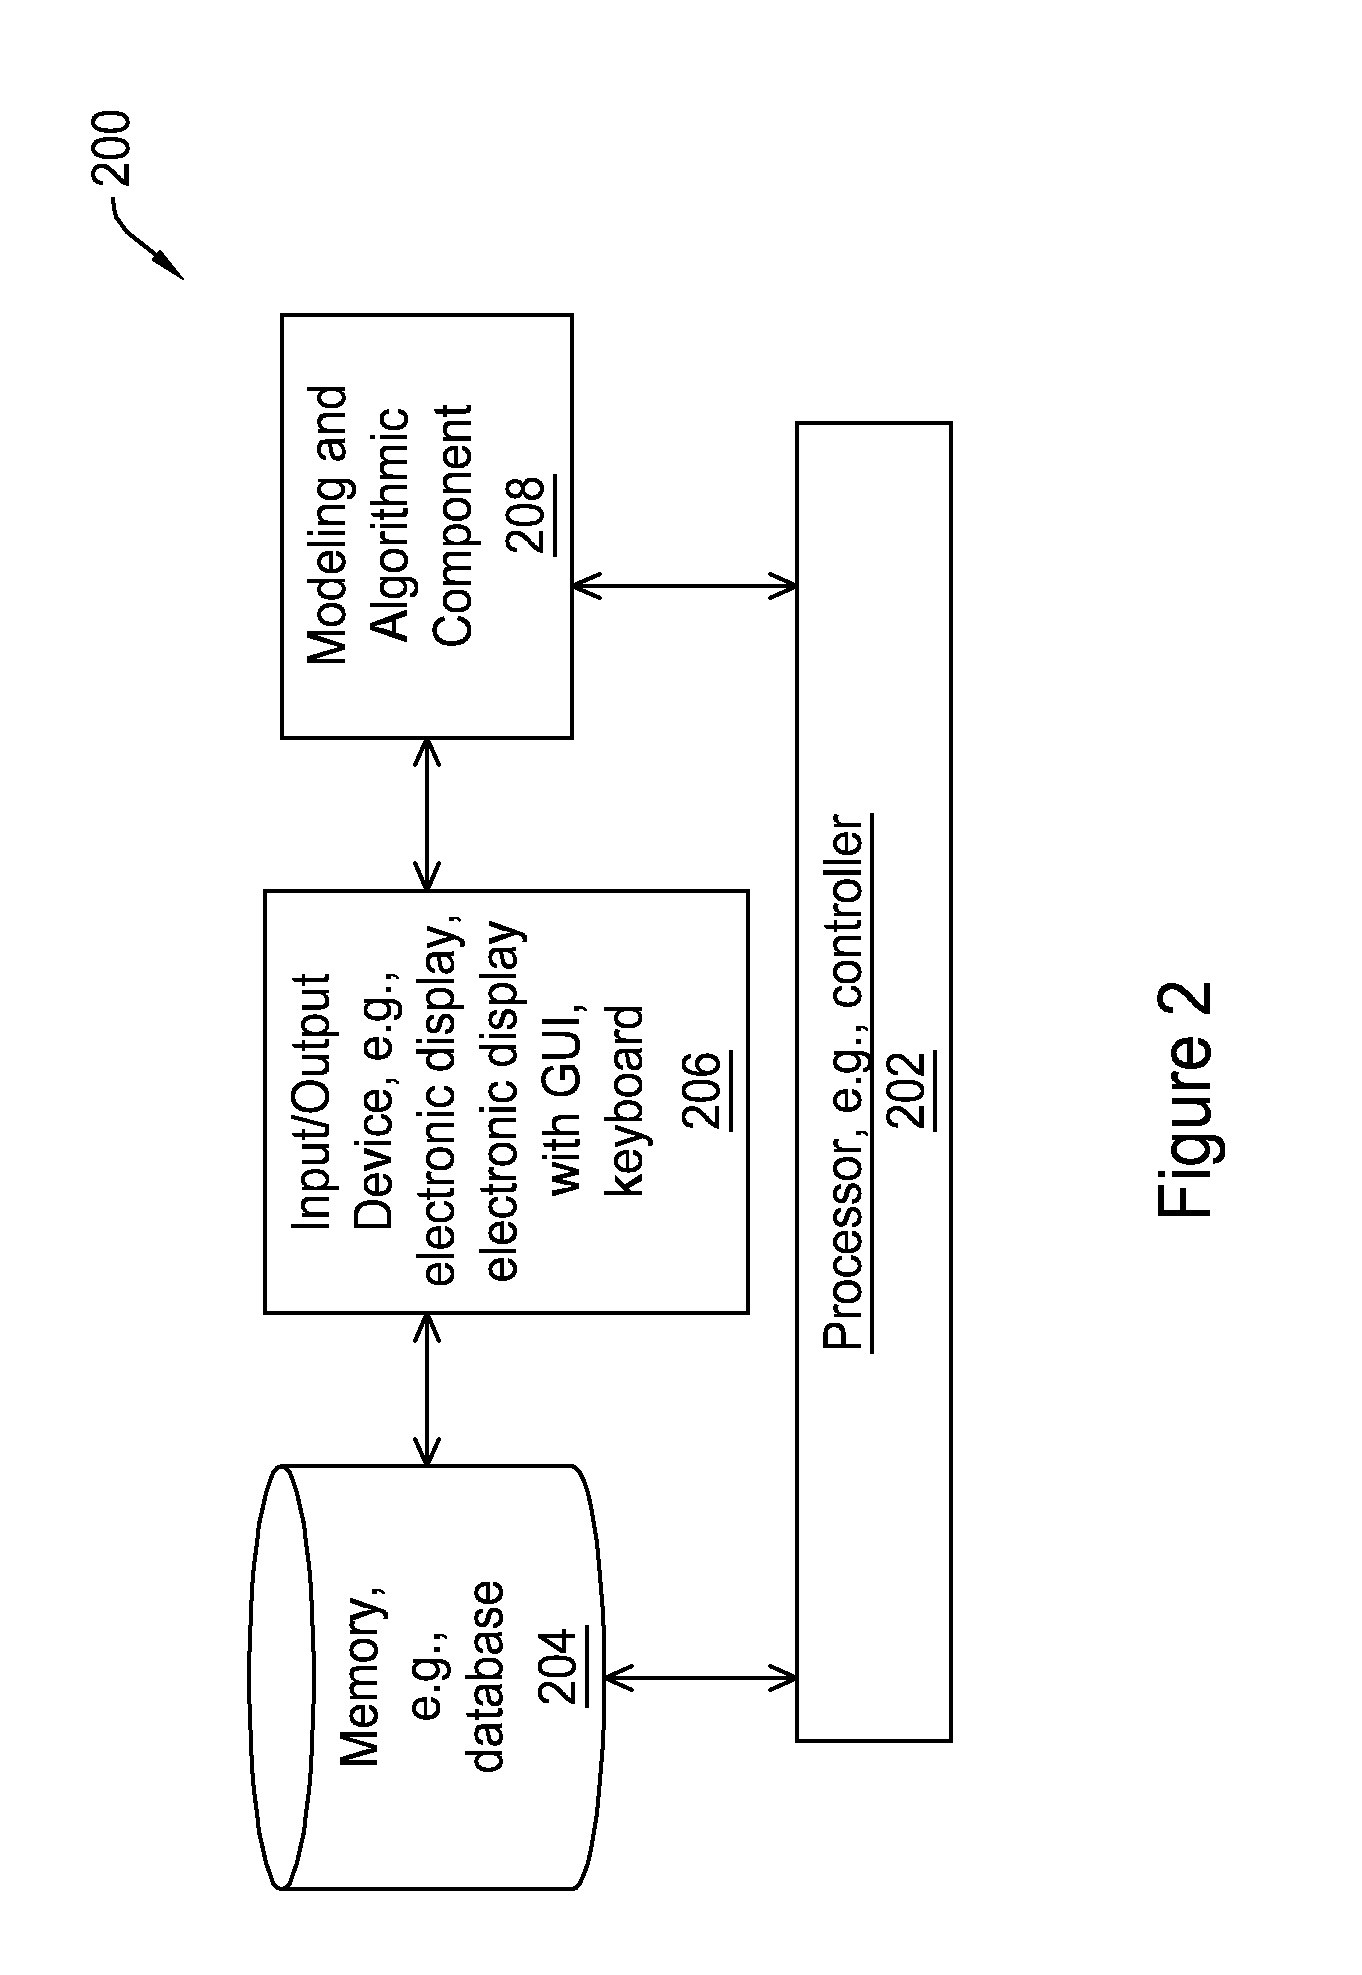 System and Method of Stochastic Resource-Constrained Project Scheduling